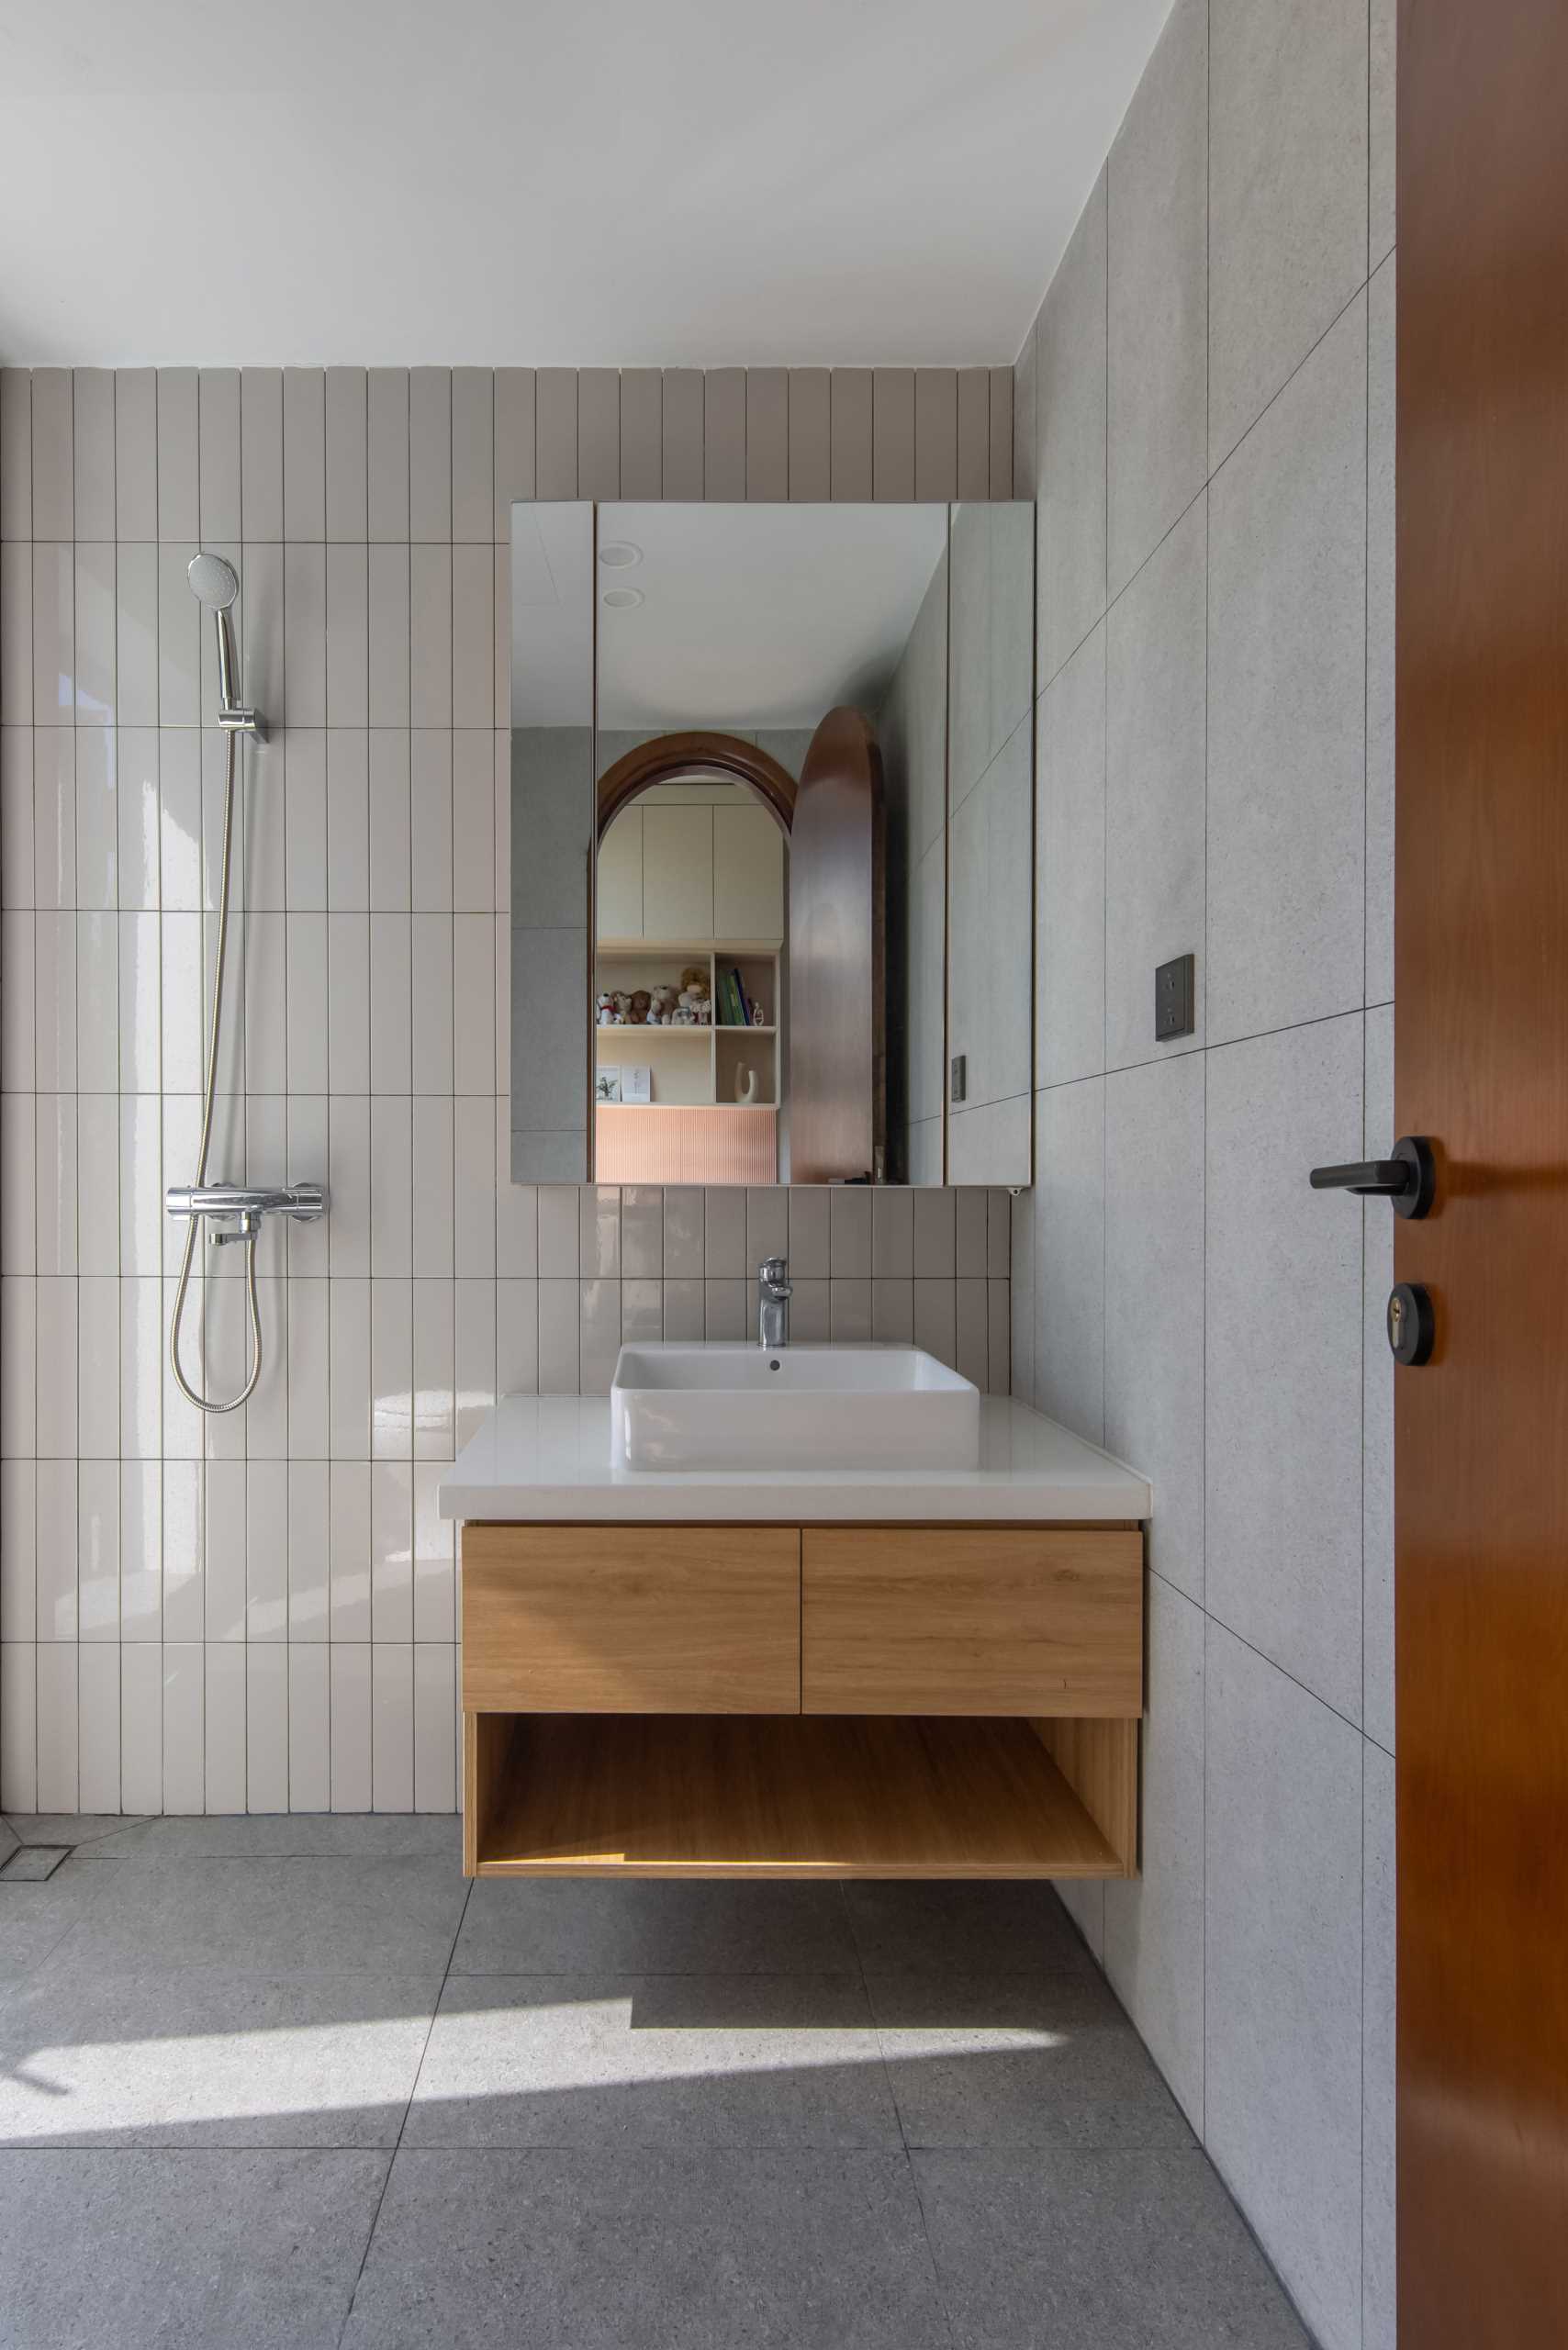 An ensuite bathroom includes a combination of tiles and an open shower.